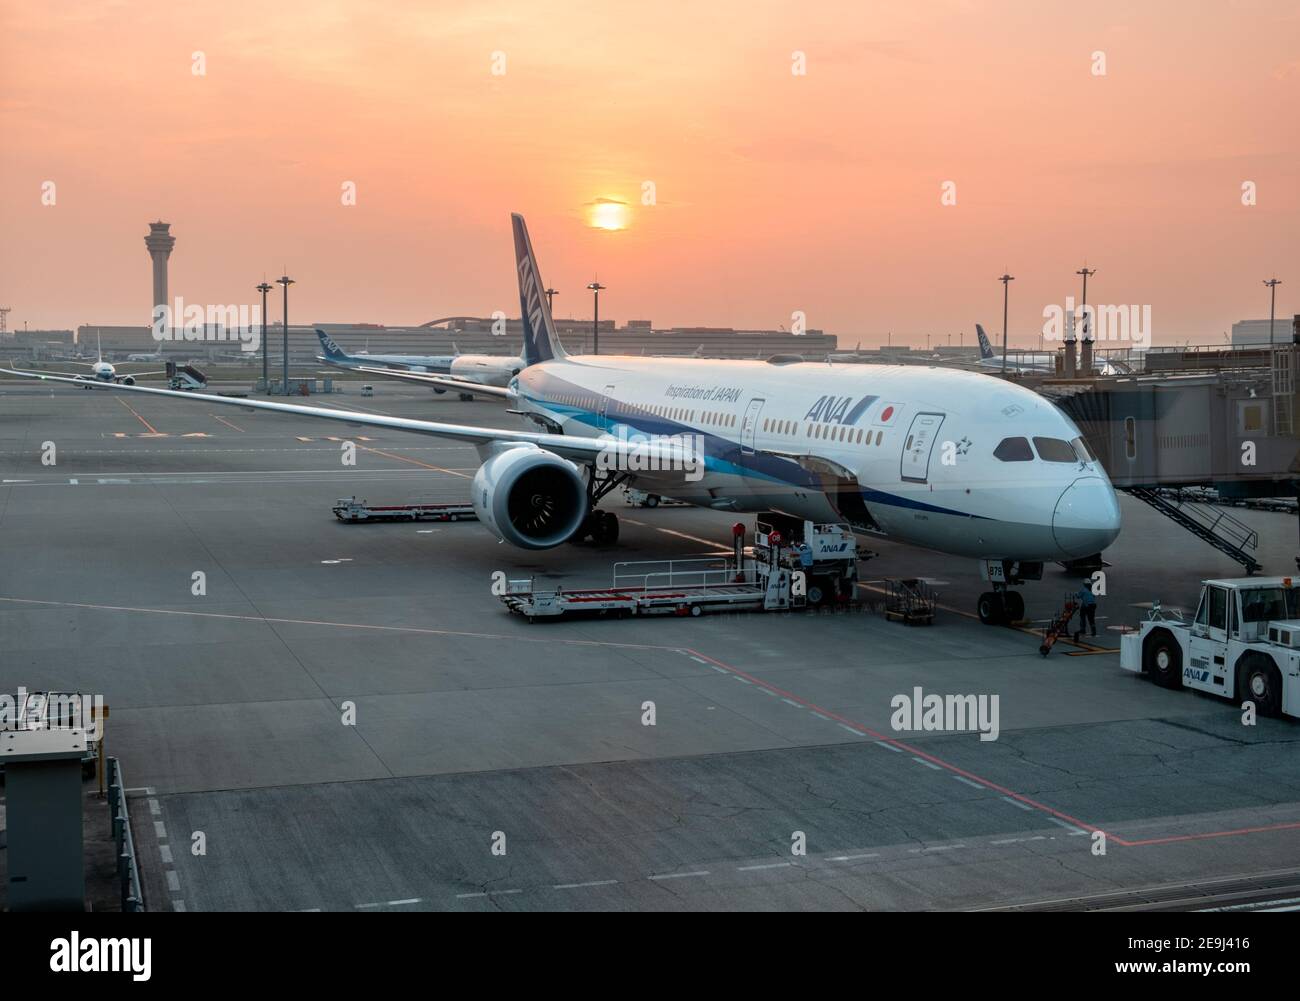 ANA airplane getting ready at Narita Airport in Tokyo, Japan. Early morning with a red sunrise. Stock Photo